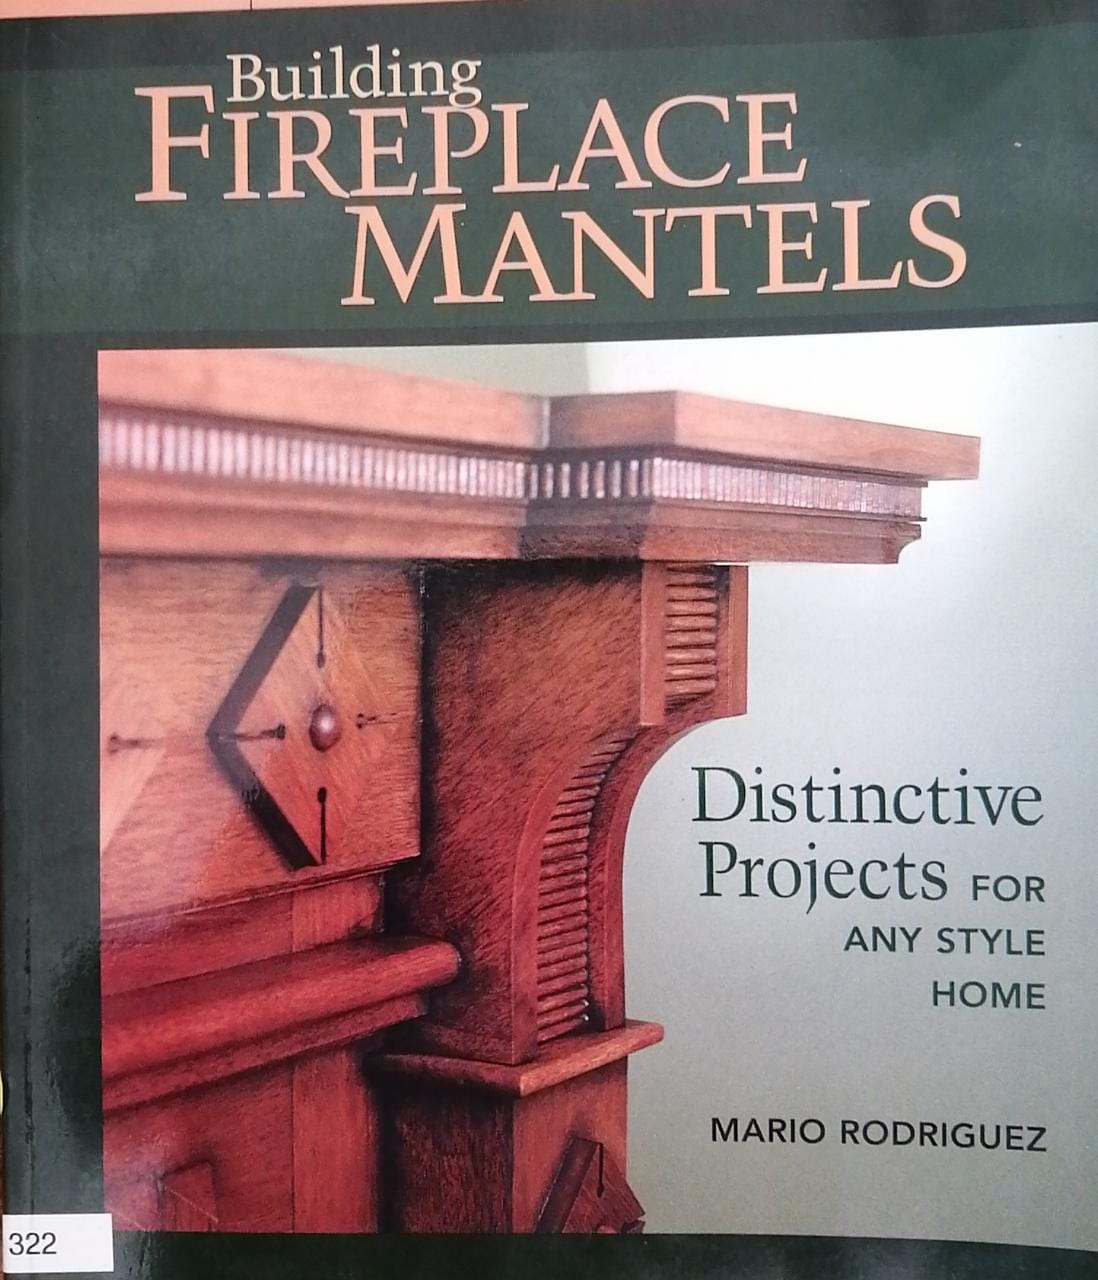 Building Fireplace Mantels - Distinctive Projects for Any Style of Home/B12